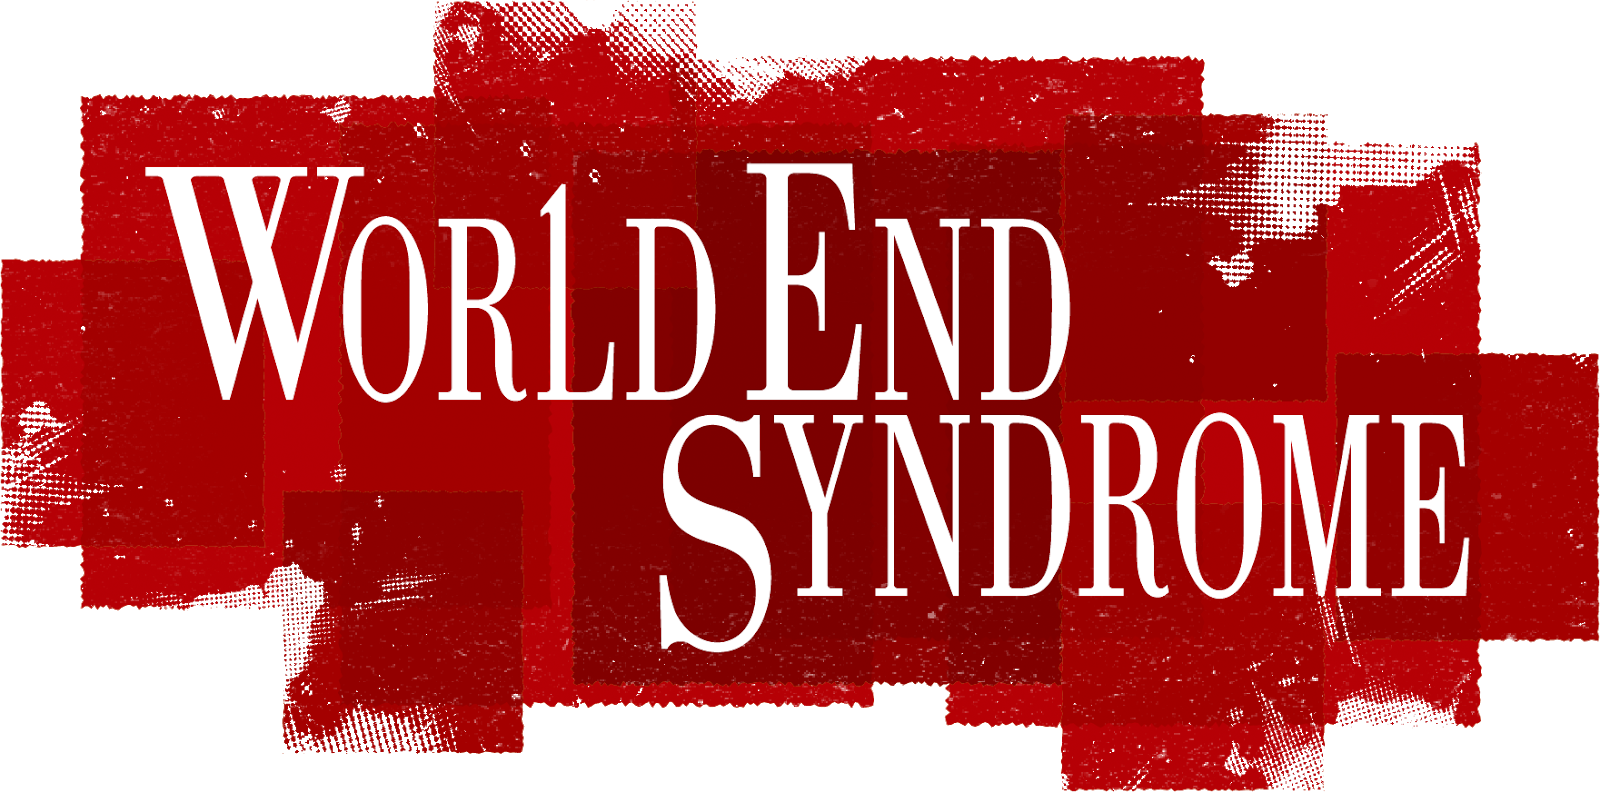 World End Syndrome – Arc System Works